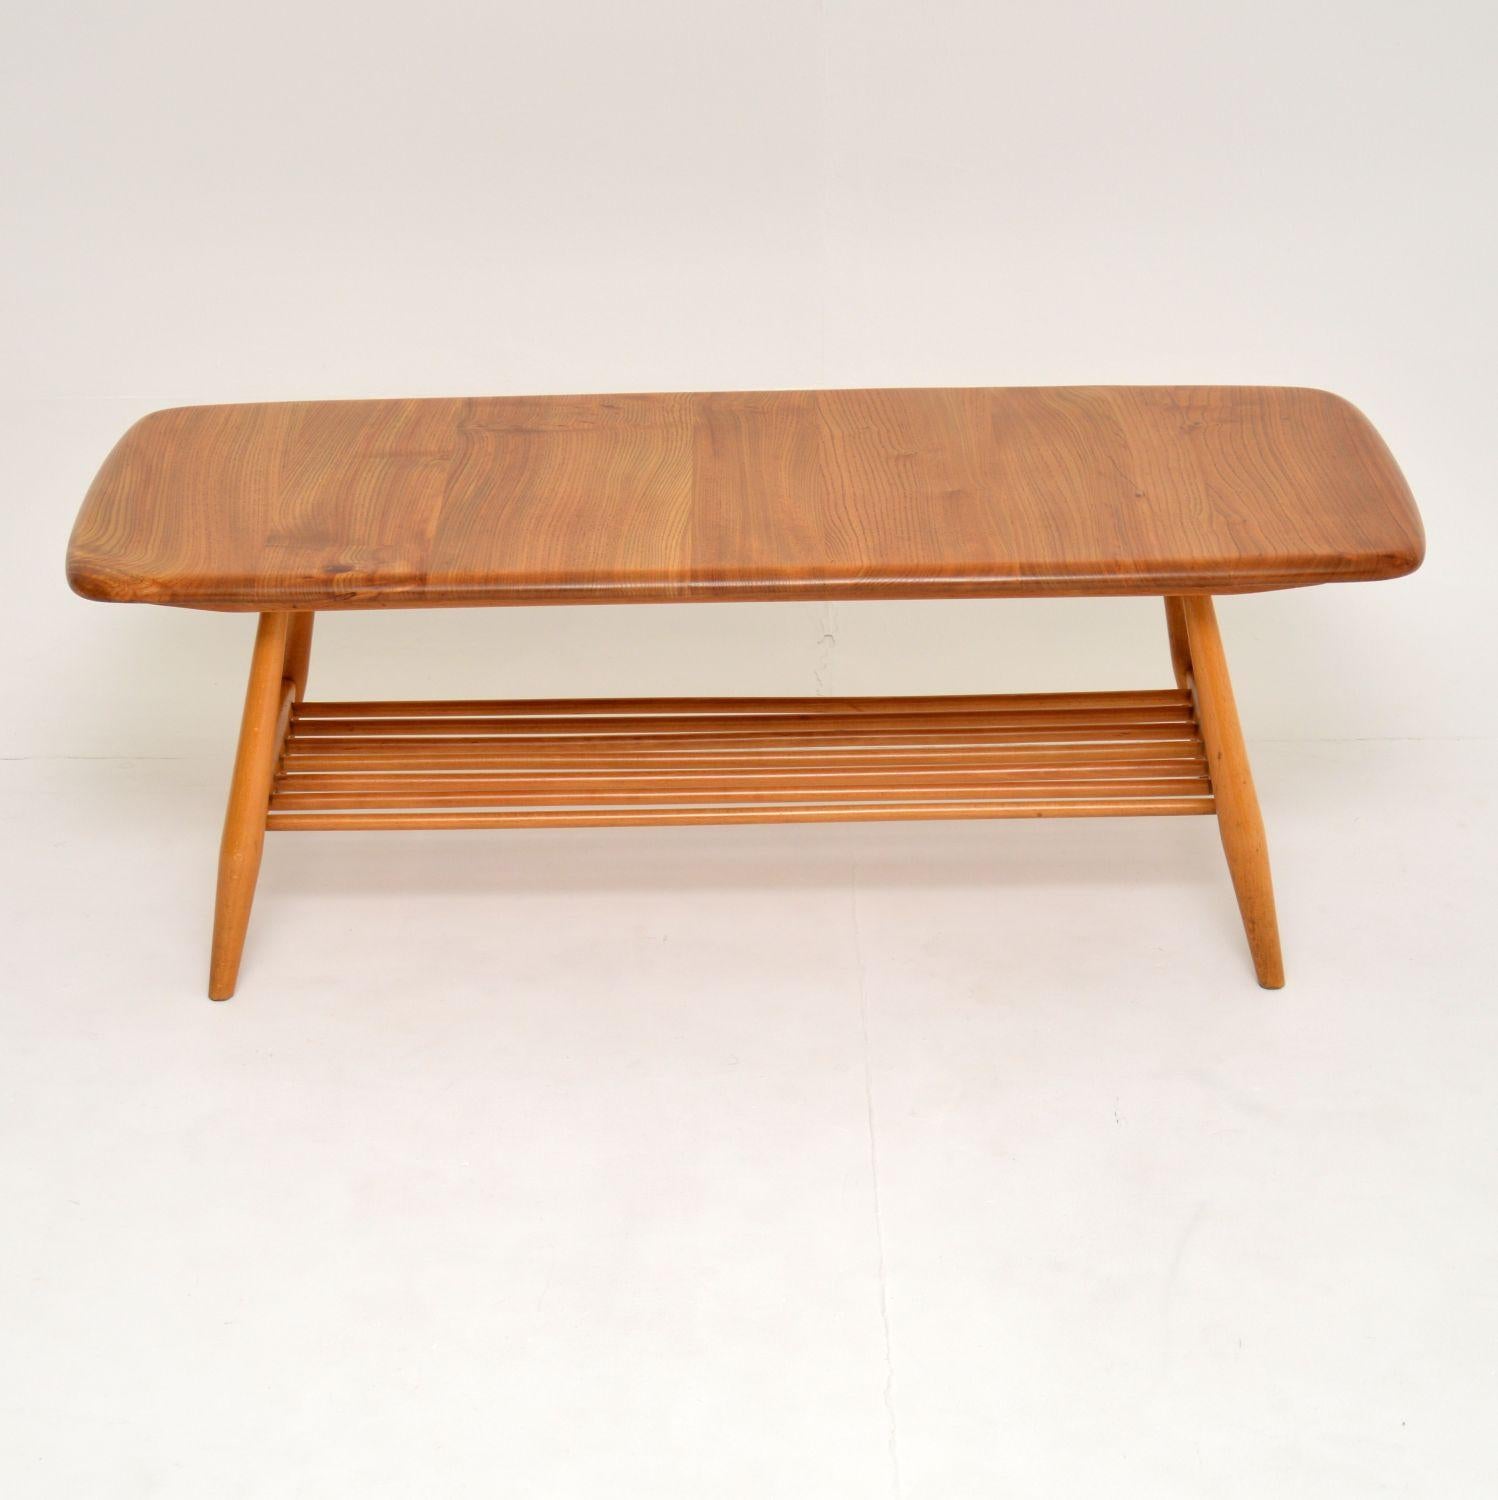 A stunning vintage ‘Windsor’ coffee table, this was made by Ercol in the 1960s-1970s.

As with all Ercol products it is extremely high quality. It is a good size, with a useful lower tier for extra storage.

The top is solid elm, with stunning